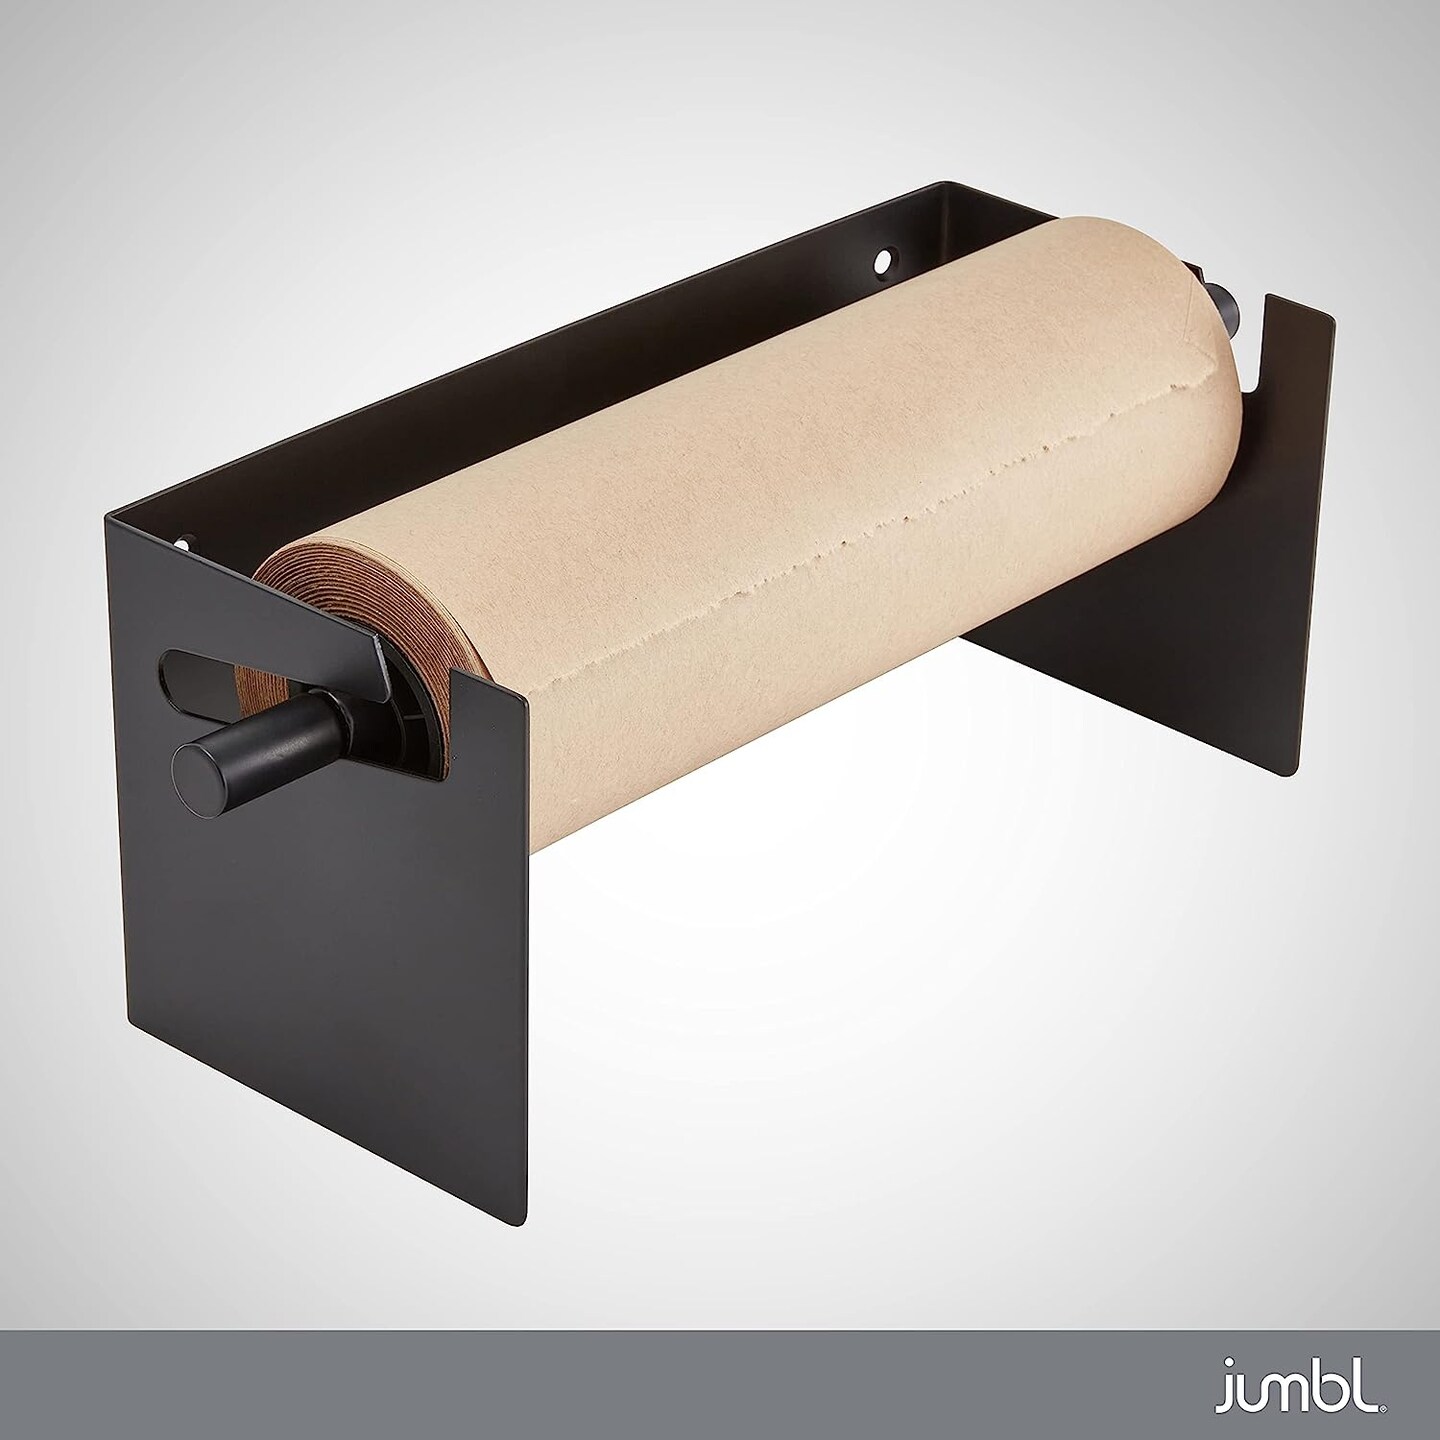 Excello Global Products Wall Mounted Kraft Paper Dispenser & Cutter: Includes 50 Meter Long Kraft Paper Roll - Perfect for To-Do Lists Daily Speci